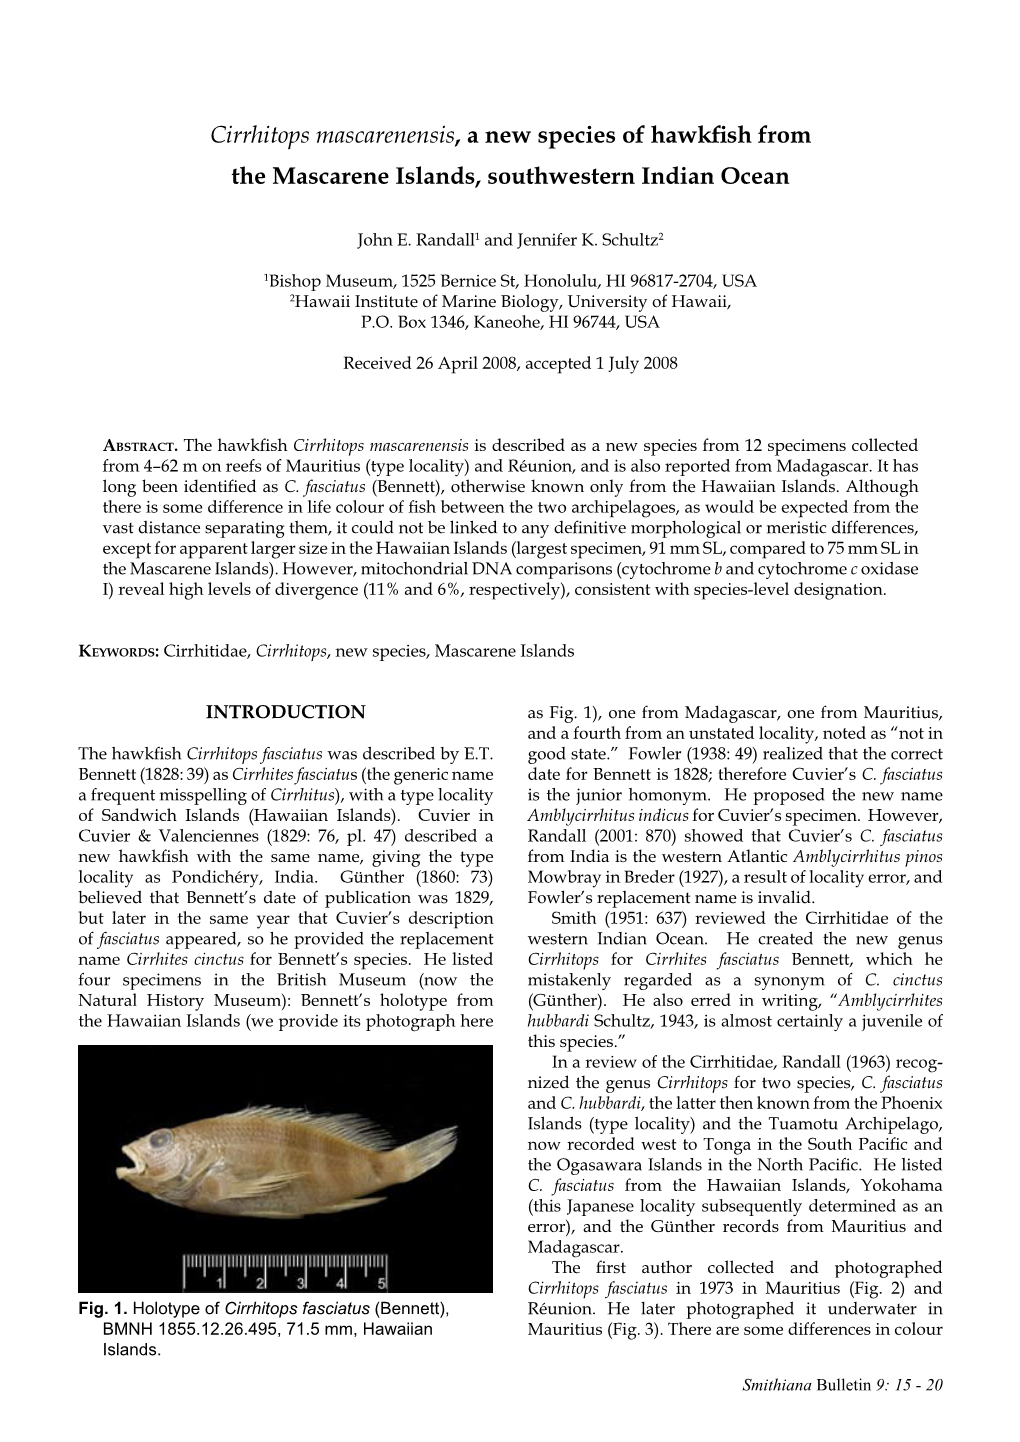 Cirrhitops Mascarenensis, a New Species of Hawkfish from the Mascarene Islands, Southwestern Indian Ocean